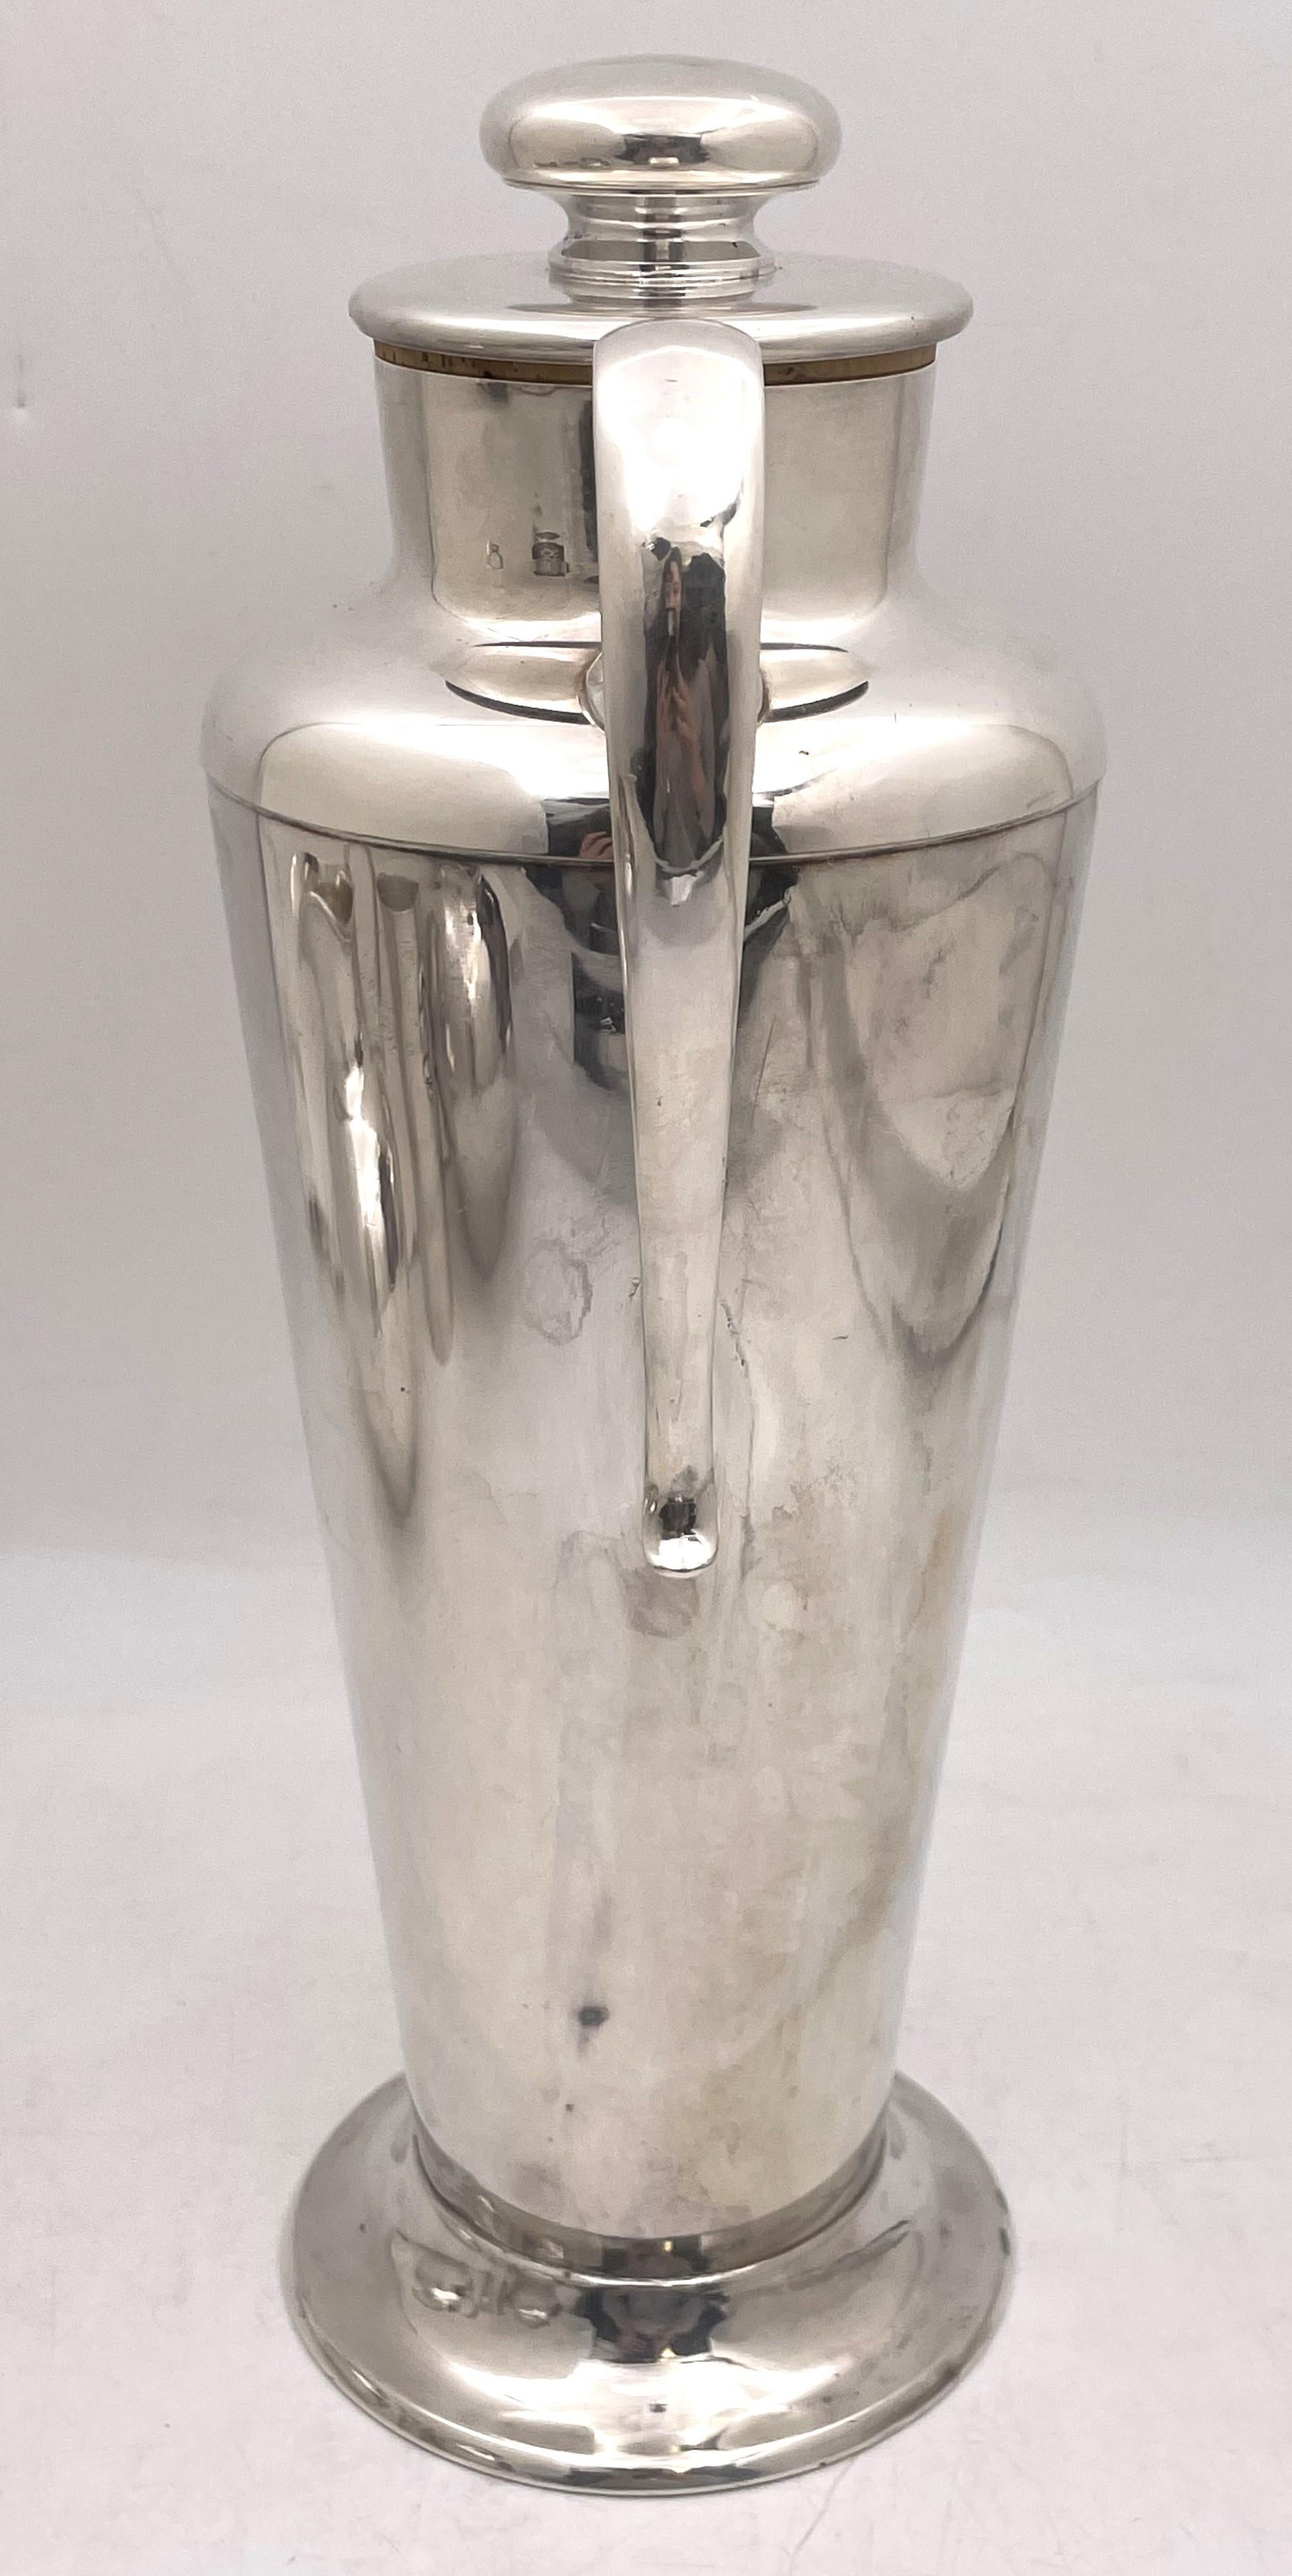 Meriden for International Sterling, silver plated cocktail shaker in Mid-Century Modern style in an elegant, geometric design. It measures 13 1/4'' in height with the lid (11 3/4'' without) by 7'' from handle to spout and bears hallmarks and a